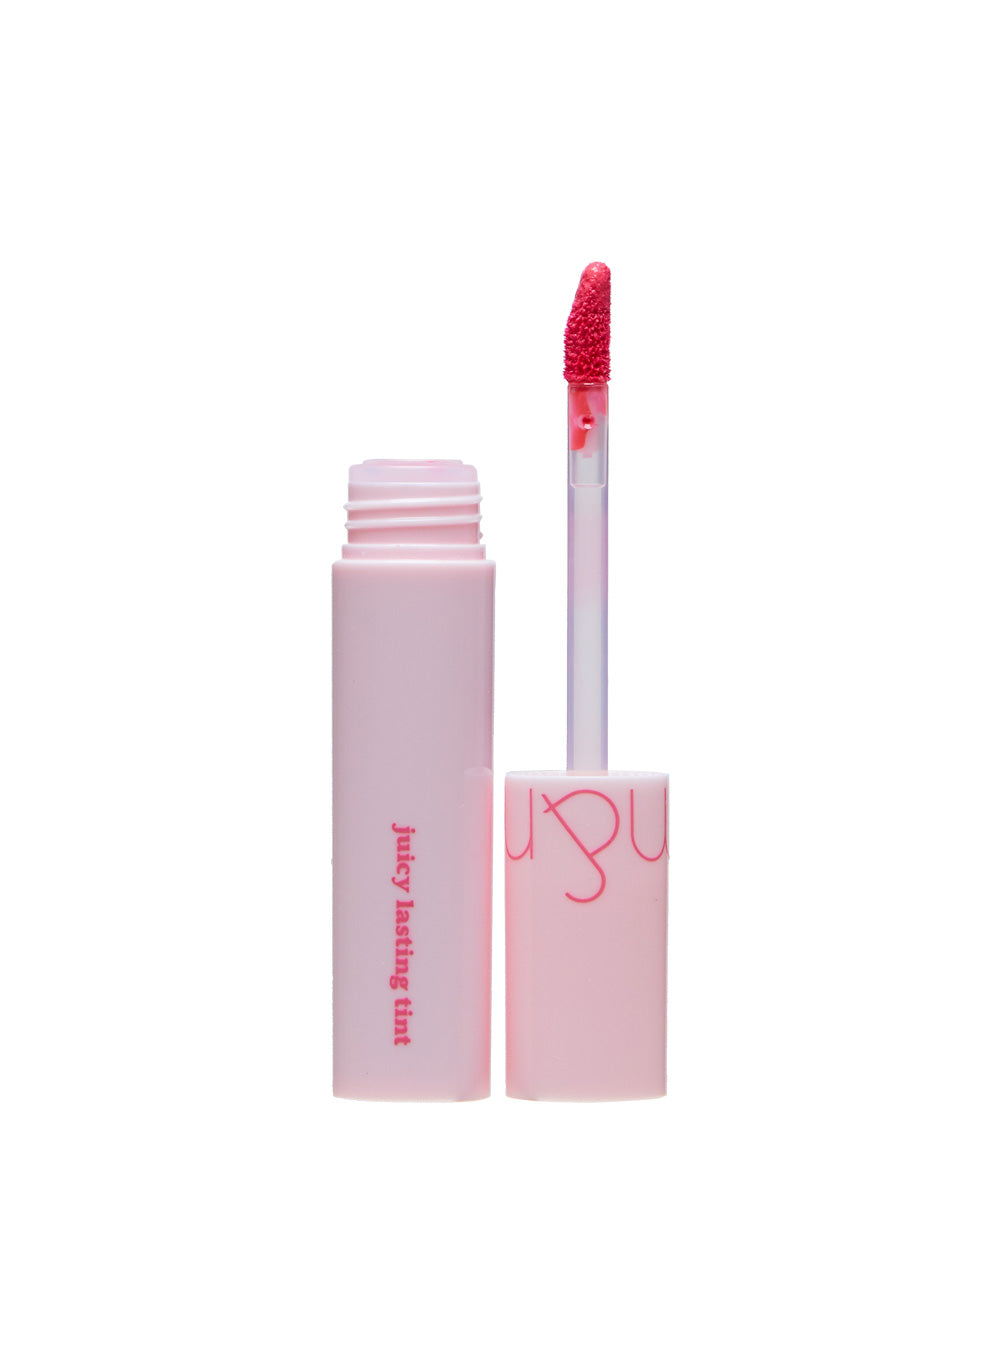 [rom&ad] Juicy Lasting Tint - 26 VERY BERRY PINK